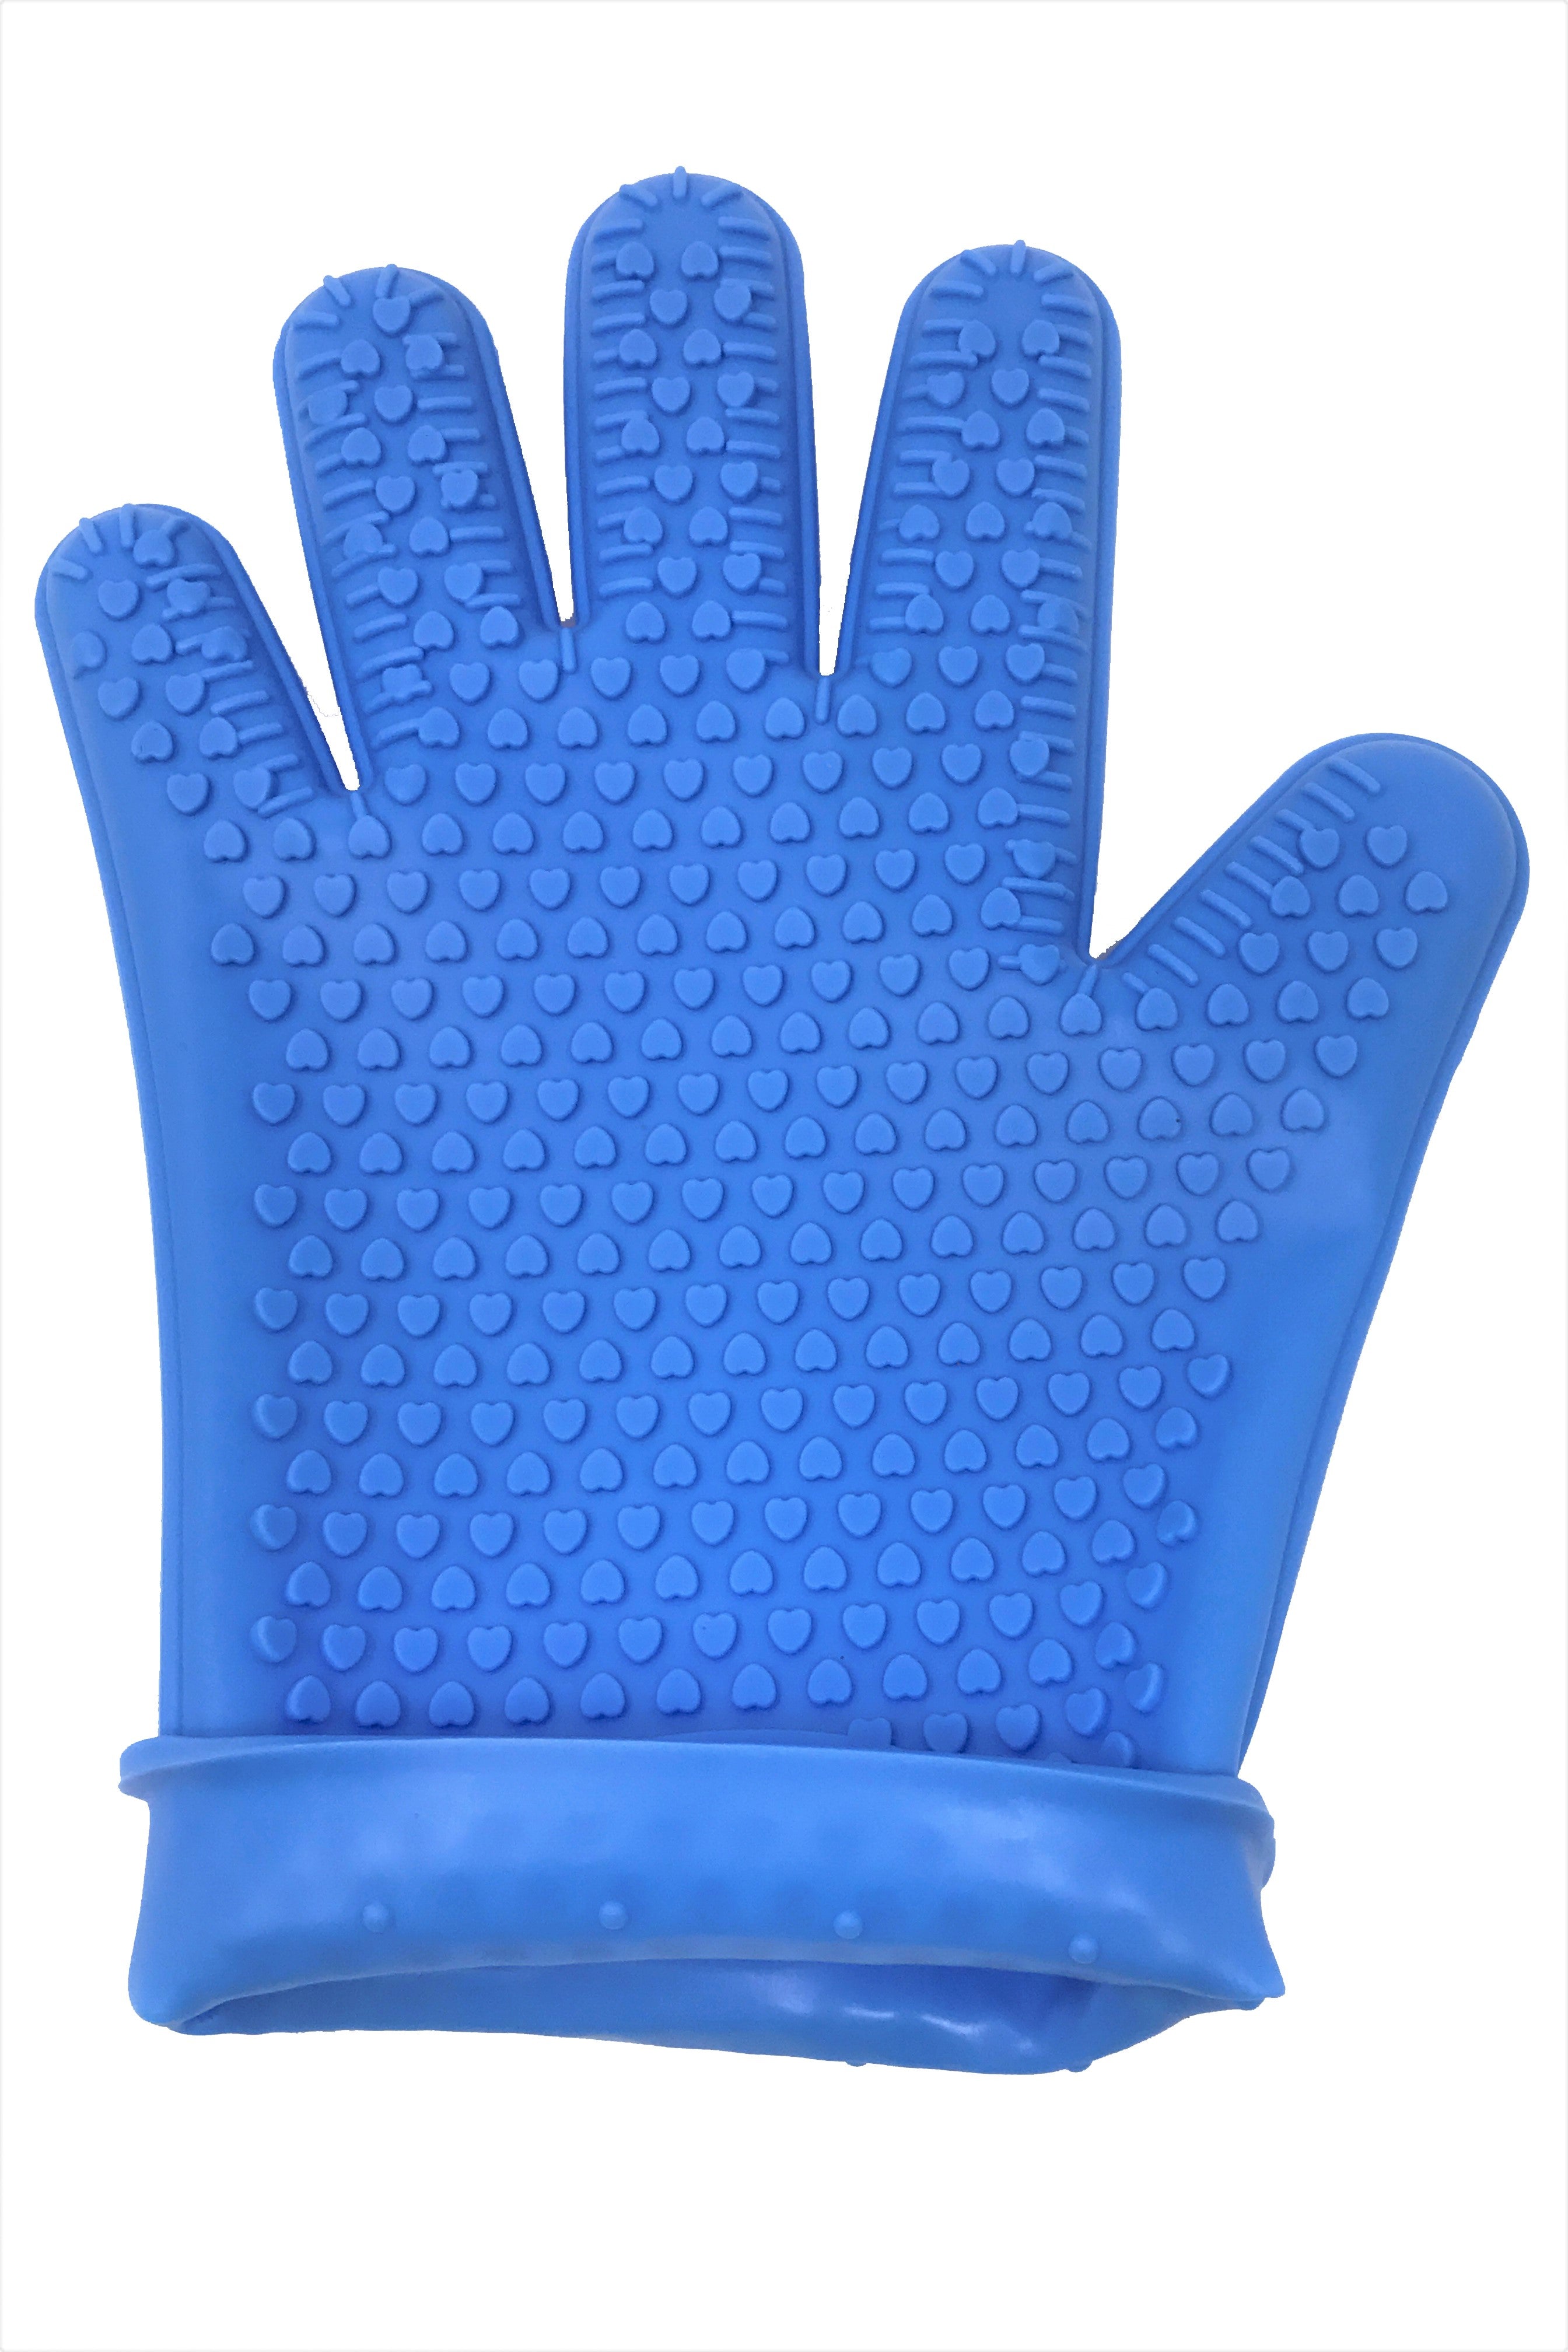 Heat Resistant Silicone Gloves - 25 pcs | Accurate Rubber Corporation